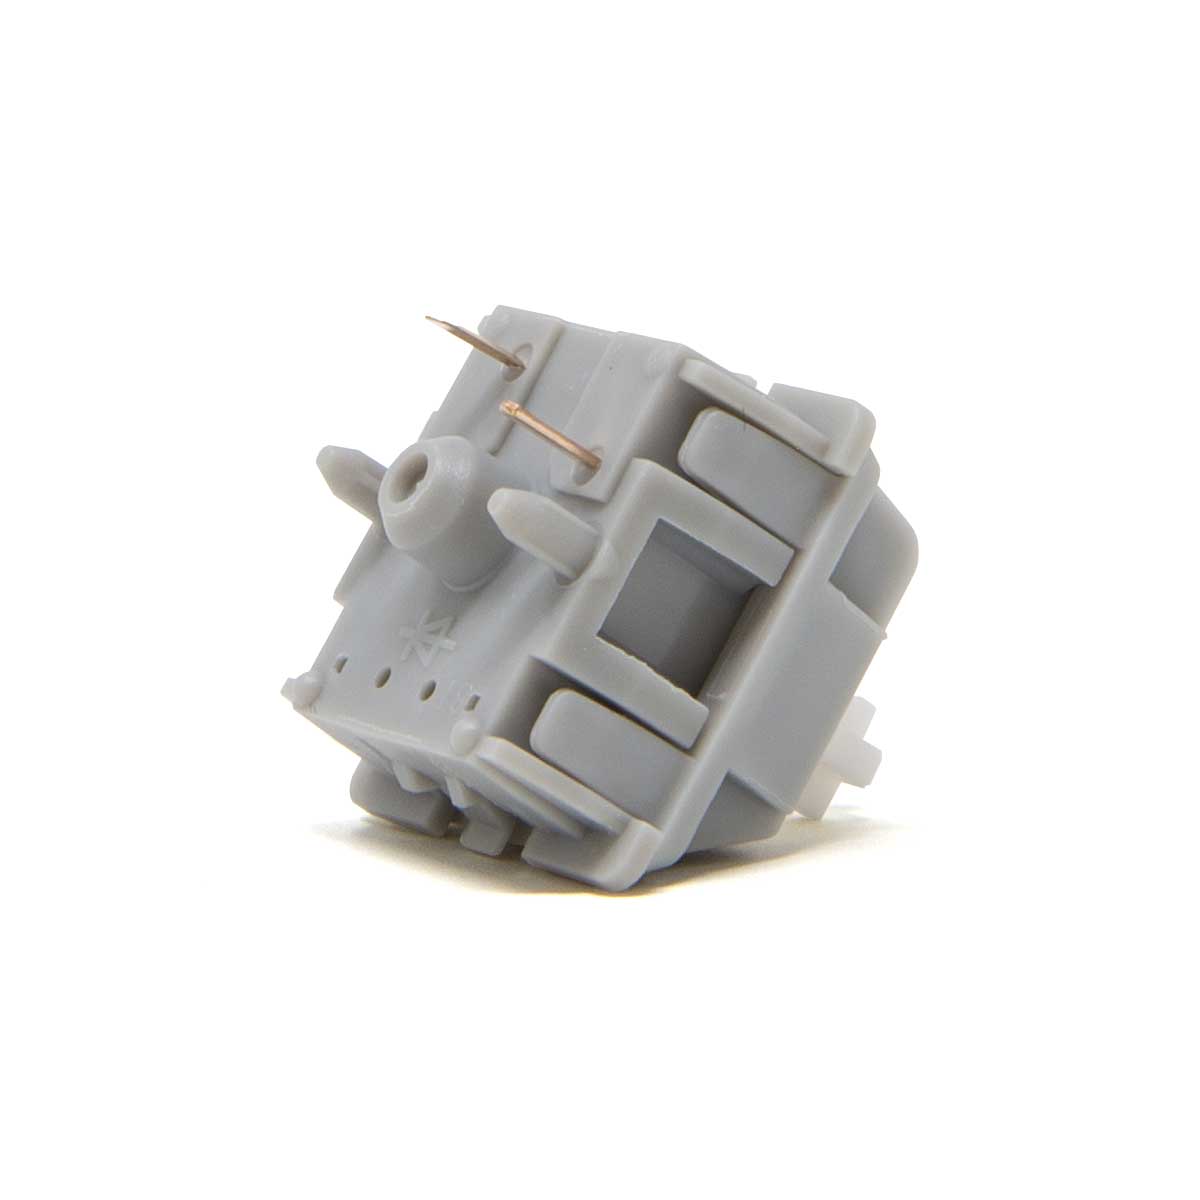 SP-Star Meteor White Linear Switches - Divinikey